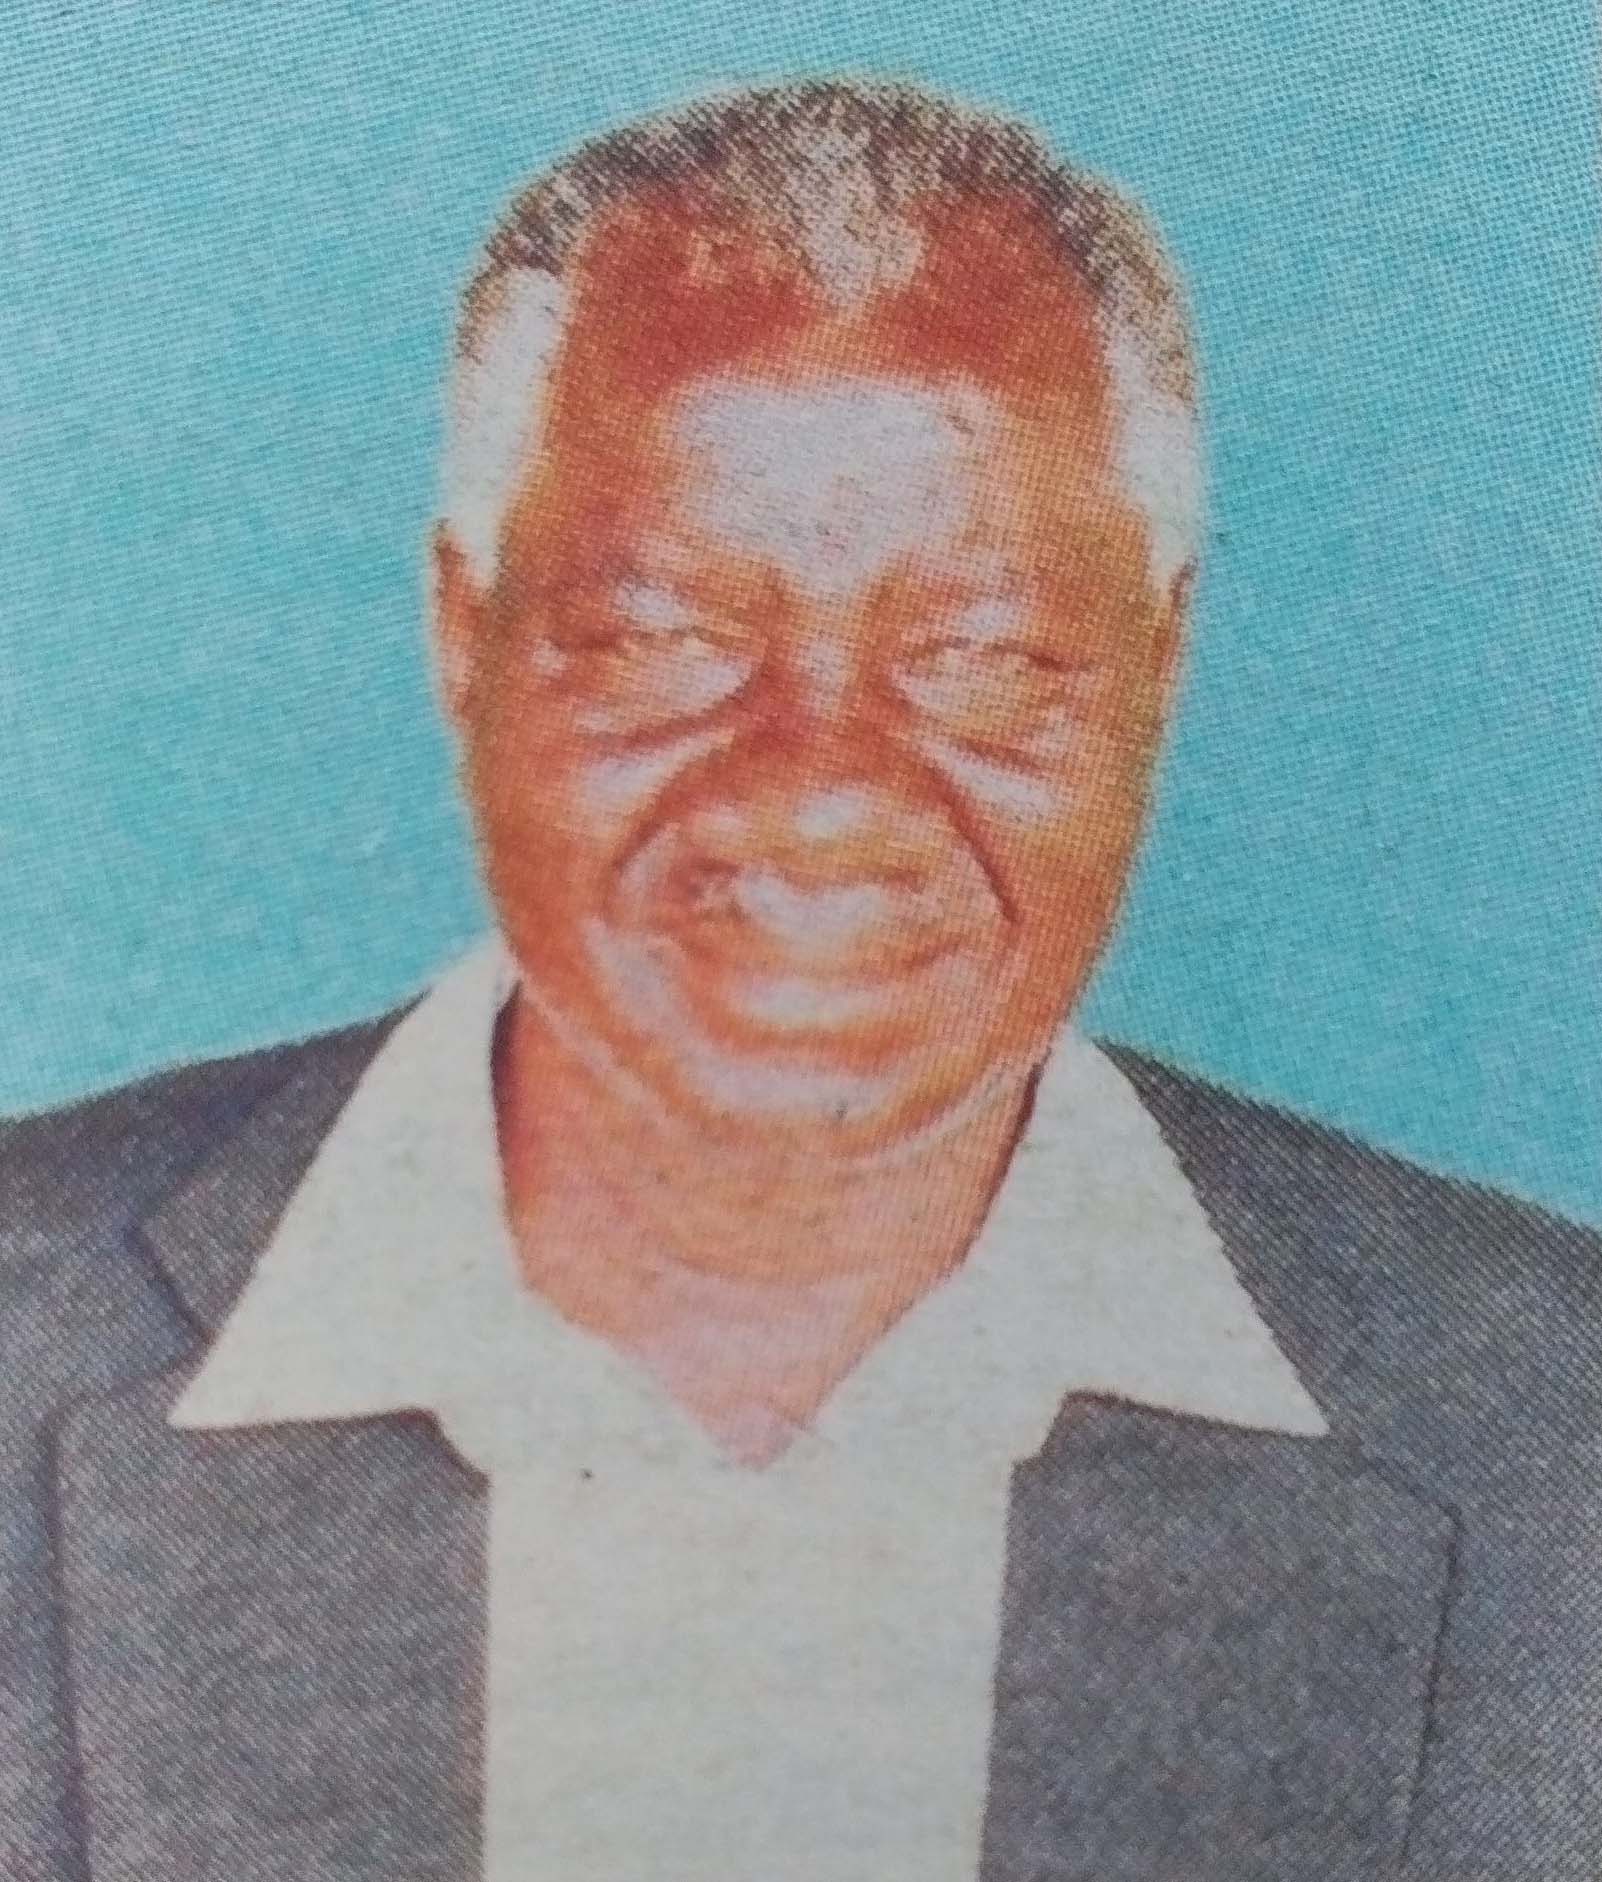 Obituary Image of Rtd Snr Ass. Chief Moses Mochere